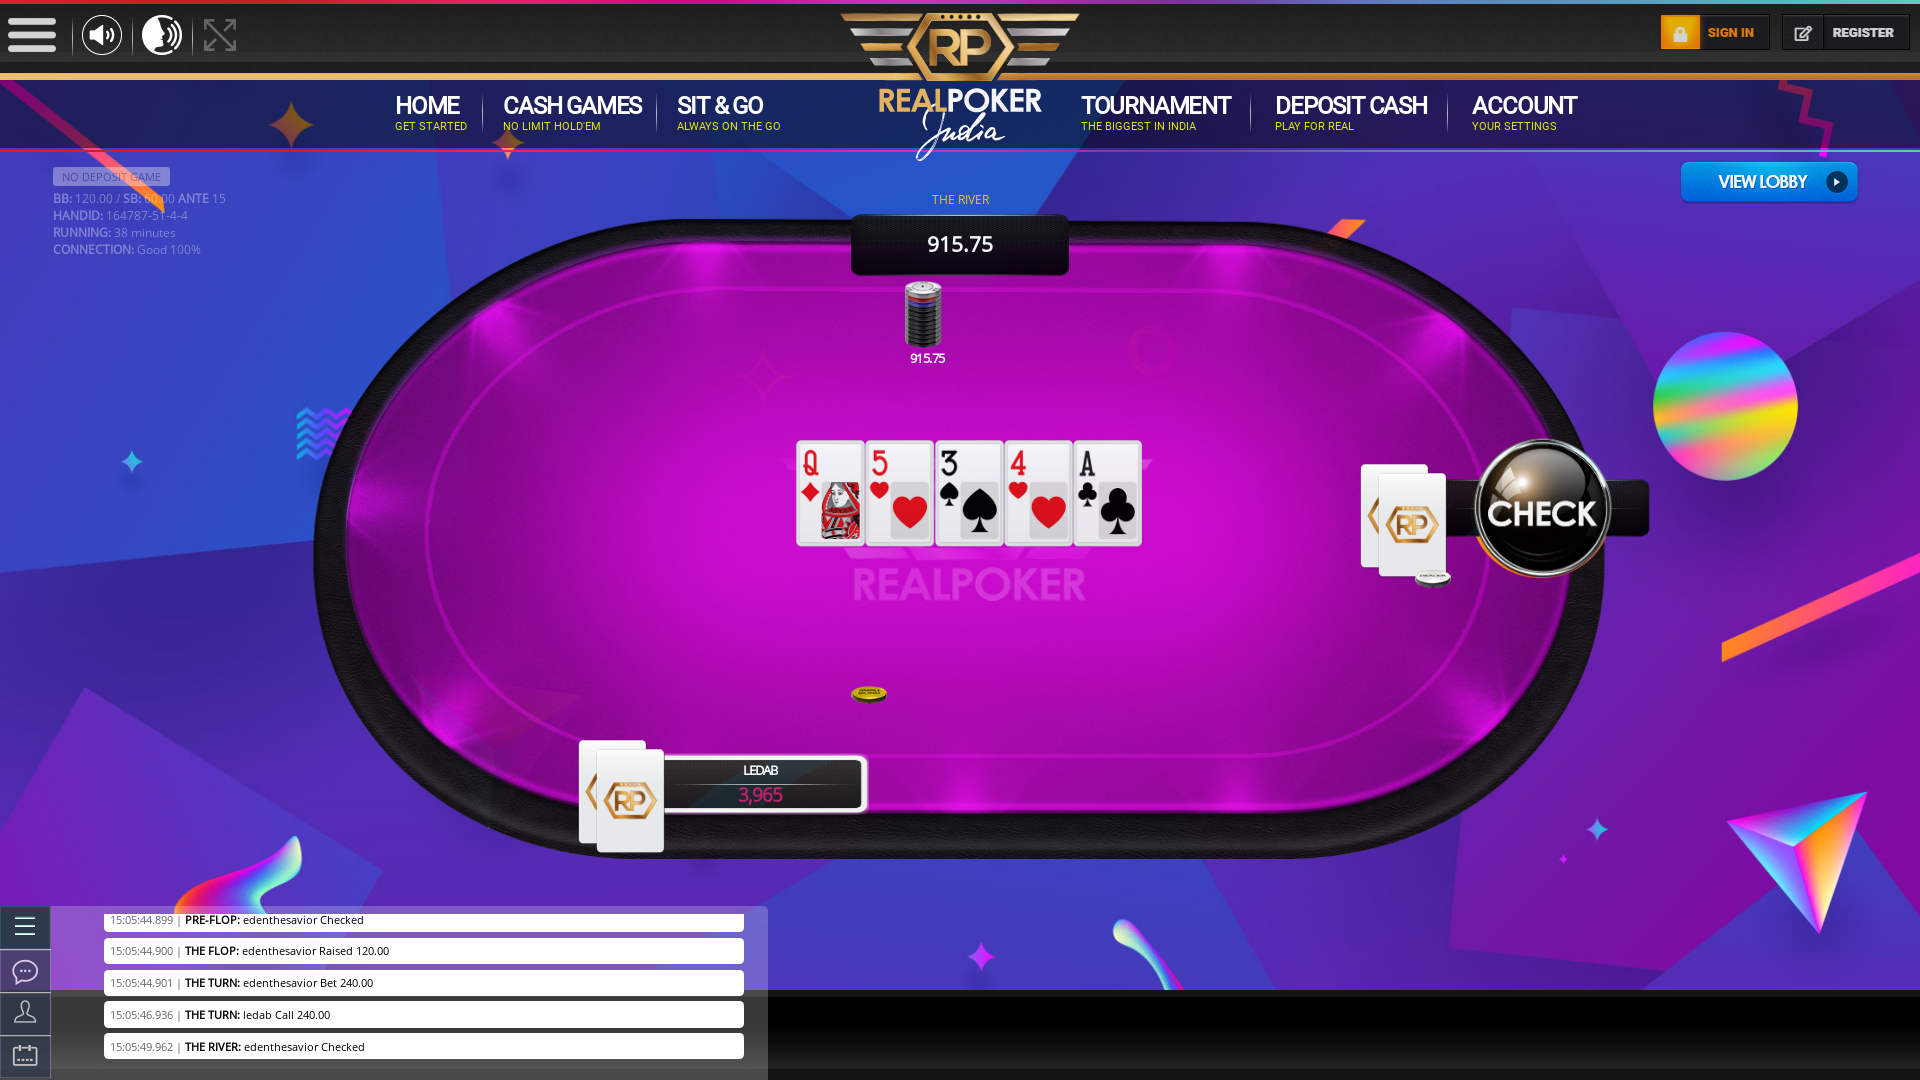 Real poker 10 player table in the 37th minute of the match